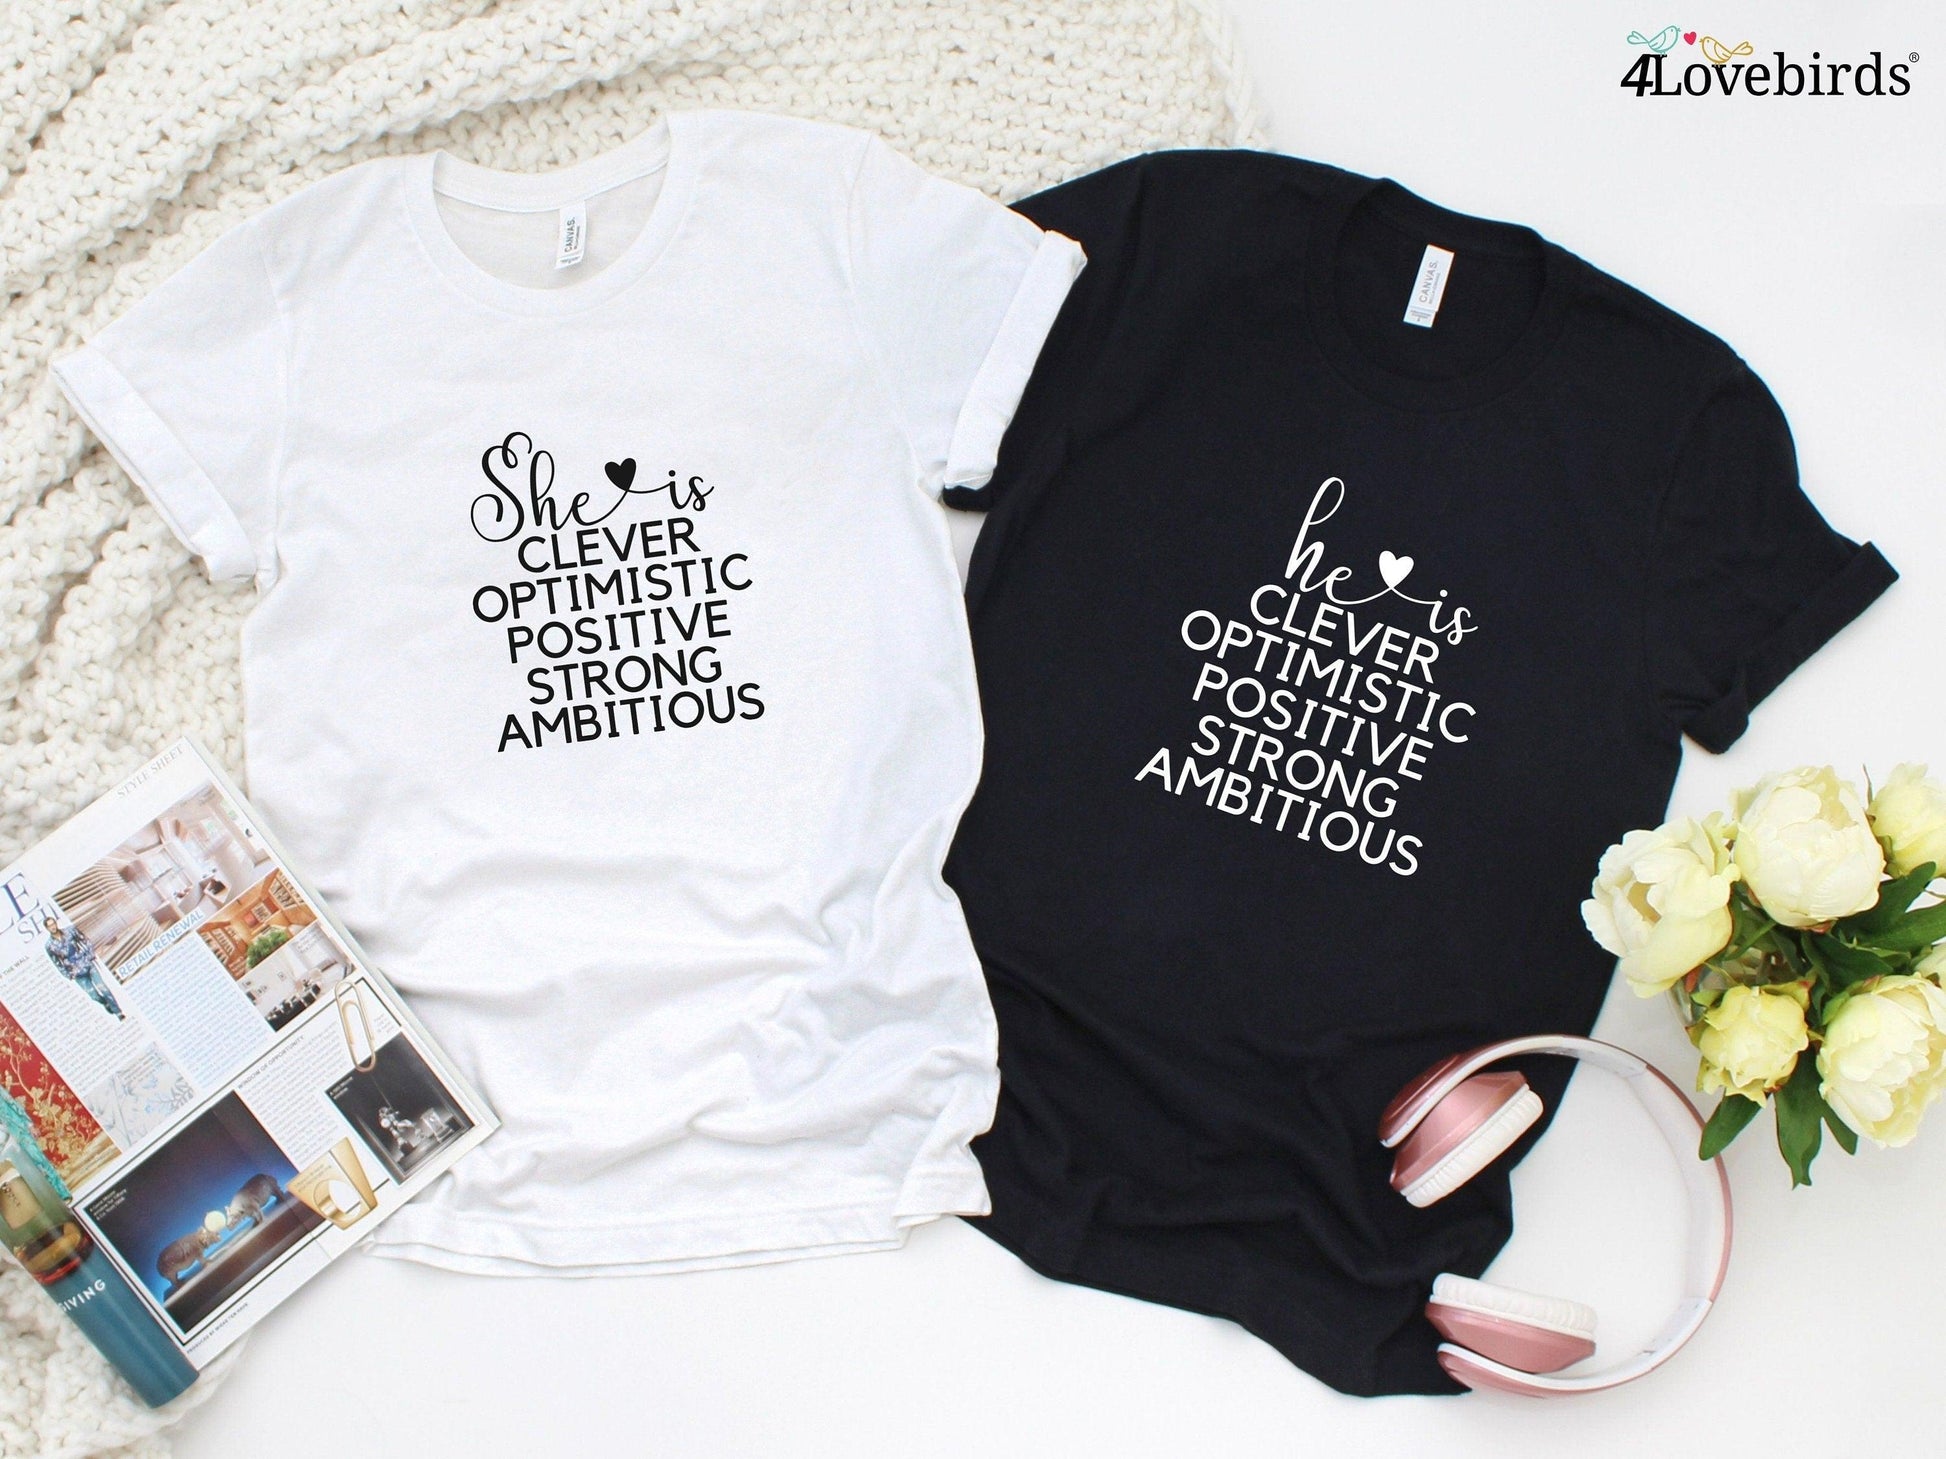 She / He is cleaver optimistic positive strong ambitious Hoodie, Lovers matching T-shirt, Gift for Couples, Valentine Sweatshirt - 4Lovebirds